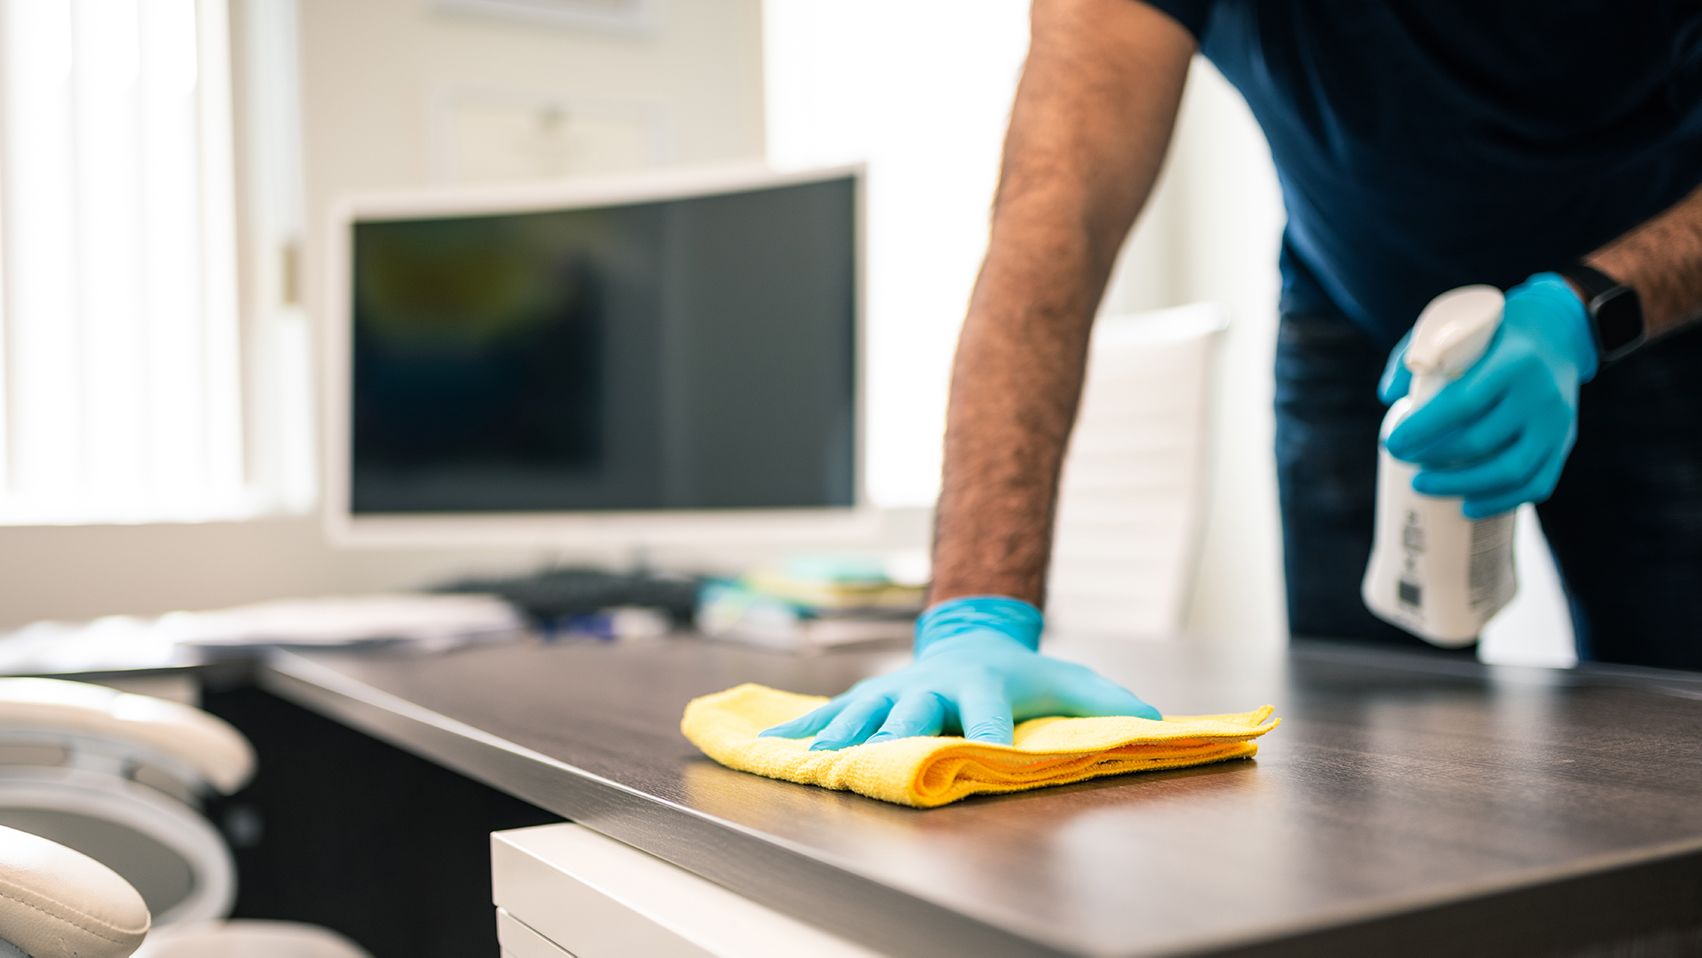 9 Ways Poor Cleaning Is Making You Sick